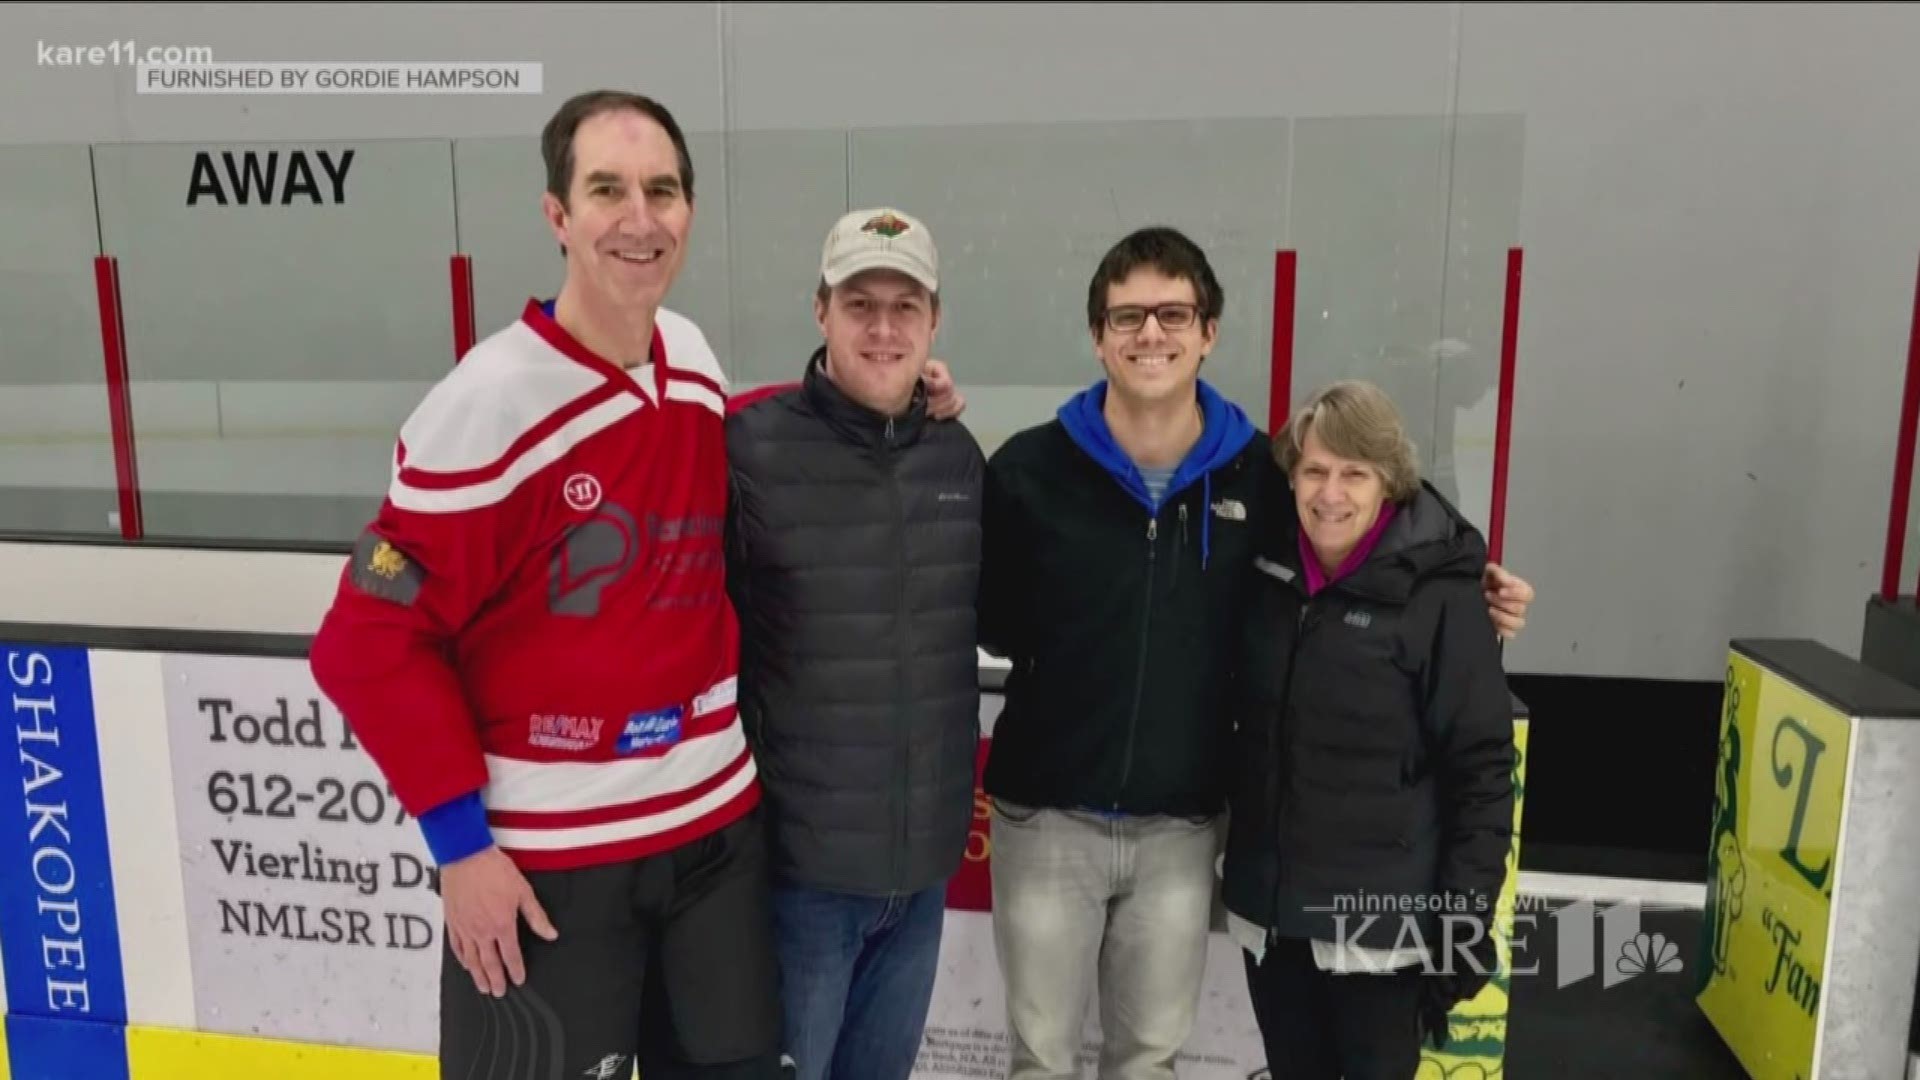 Gordie Hampson is a former NHL player who is one of many Minnesotans that have been diagnosed with Parkinson's. Here is his story.